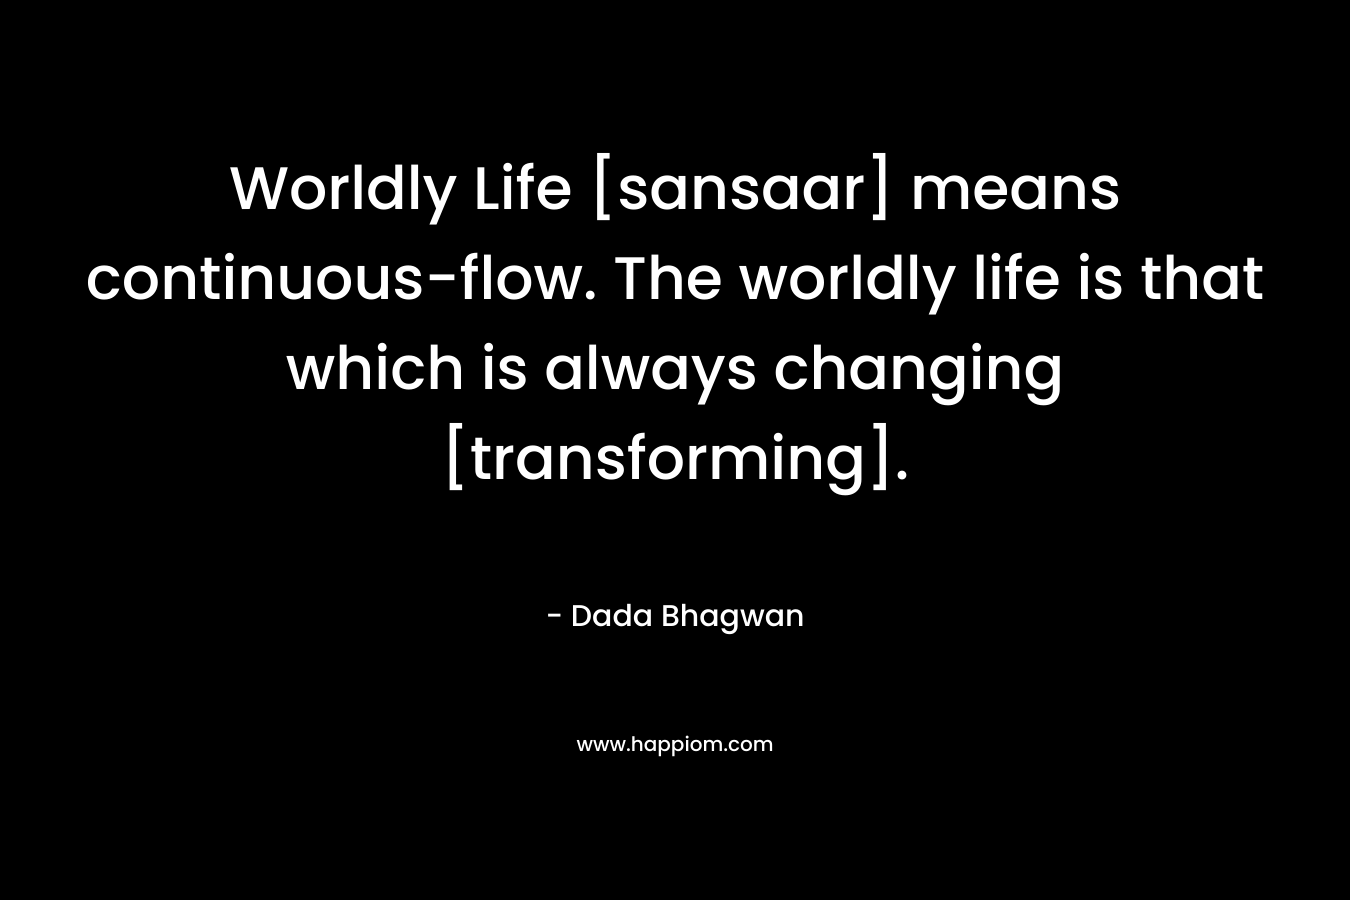 Worldly Life [sansaar] means continuous-flow. The worldly life is that which is always changing [transforming].